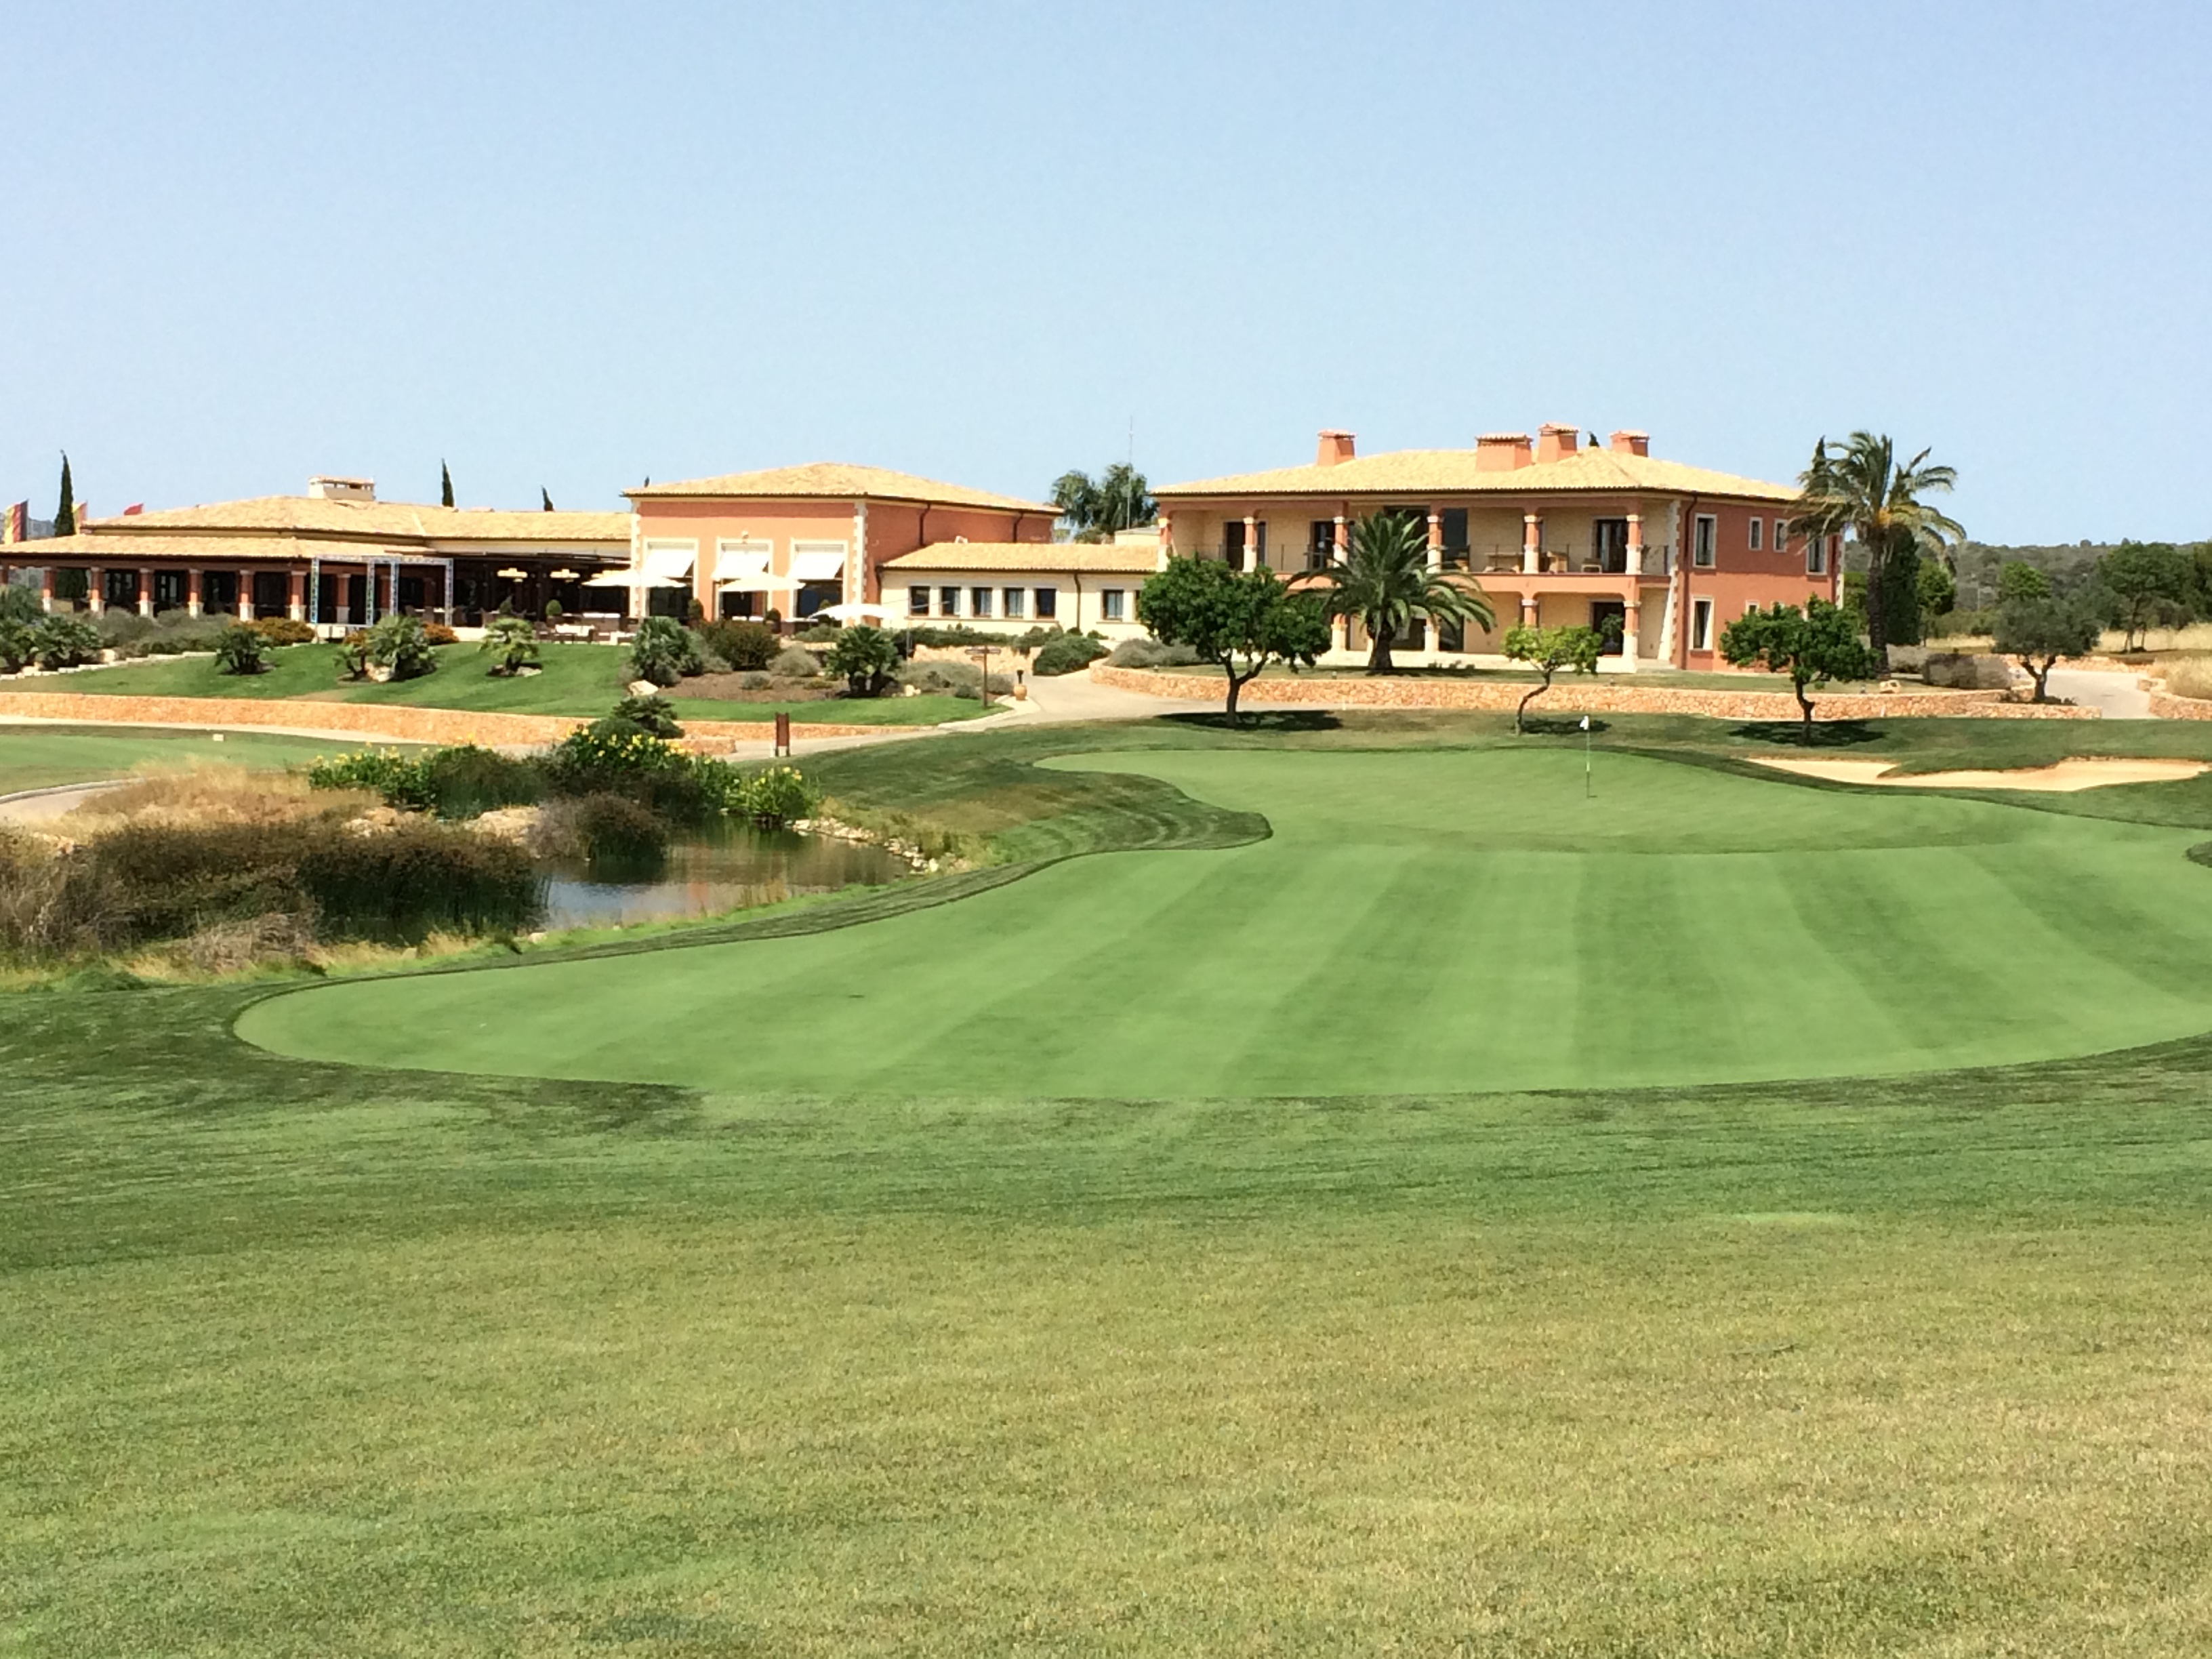 Son Gual features two loops of nine, both starting and finishing at the clubhouse